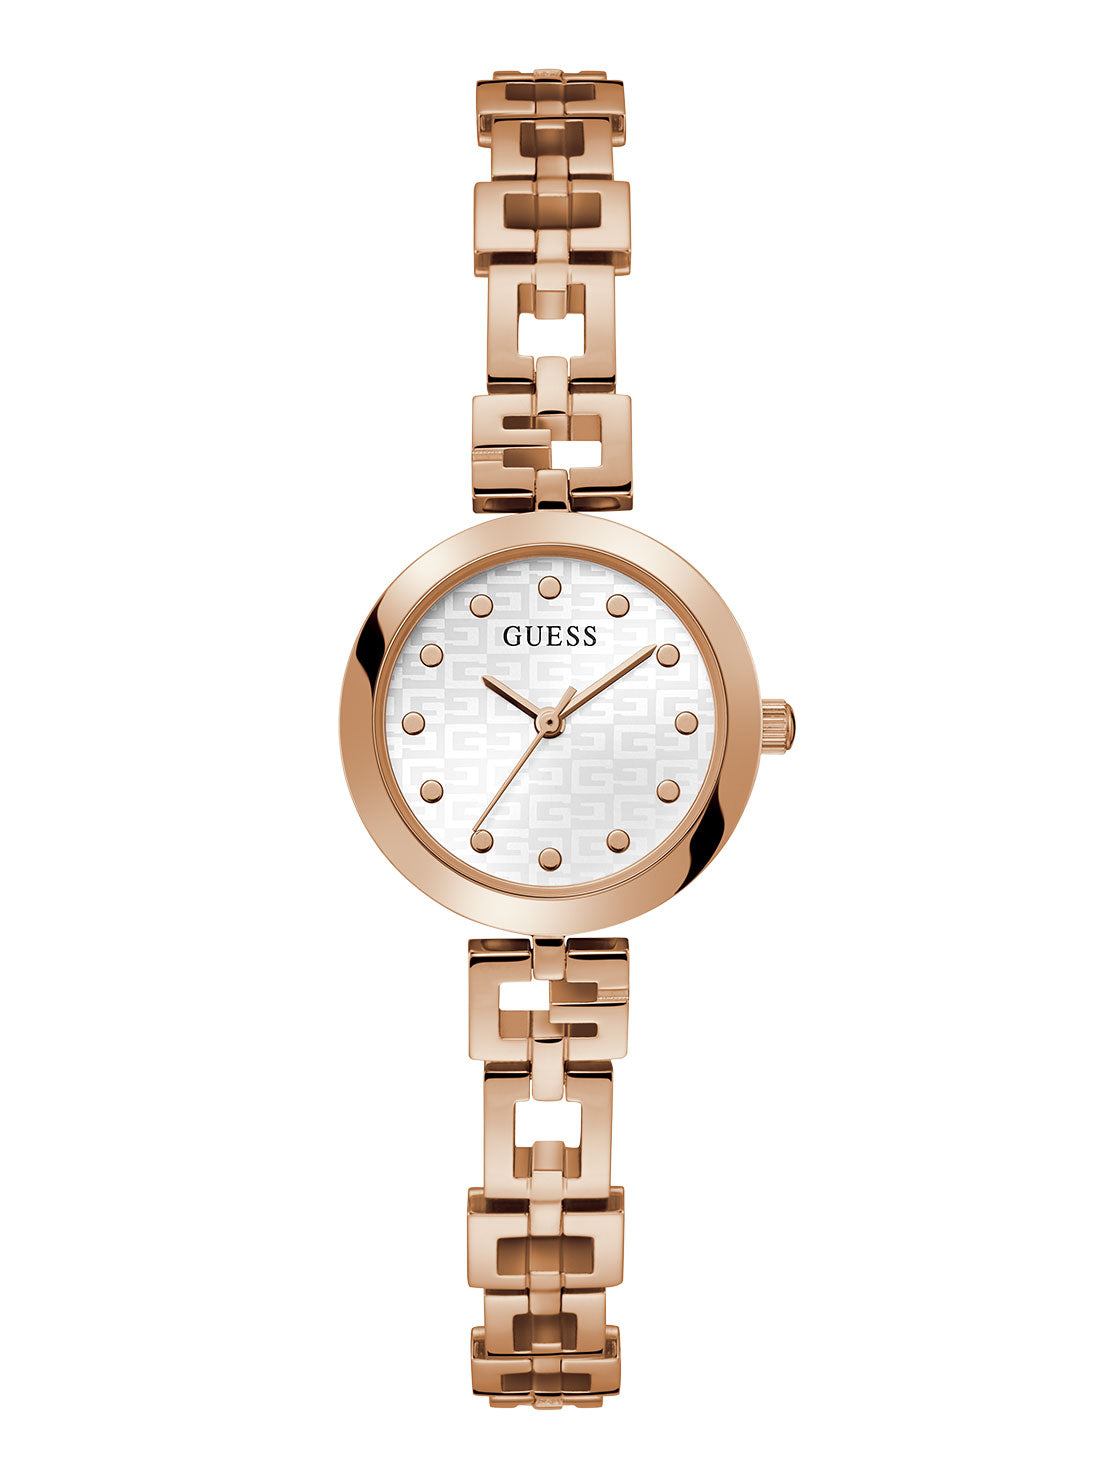 GUESS Women's Rose Gold Lady G Watch GW0549L3 Front View